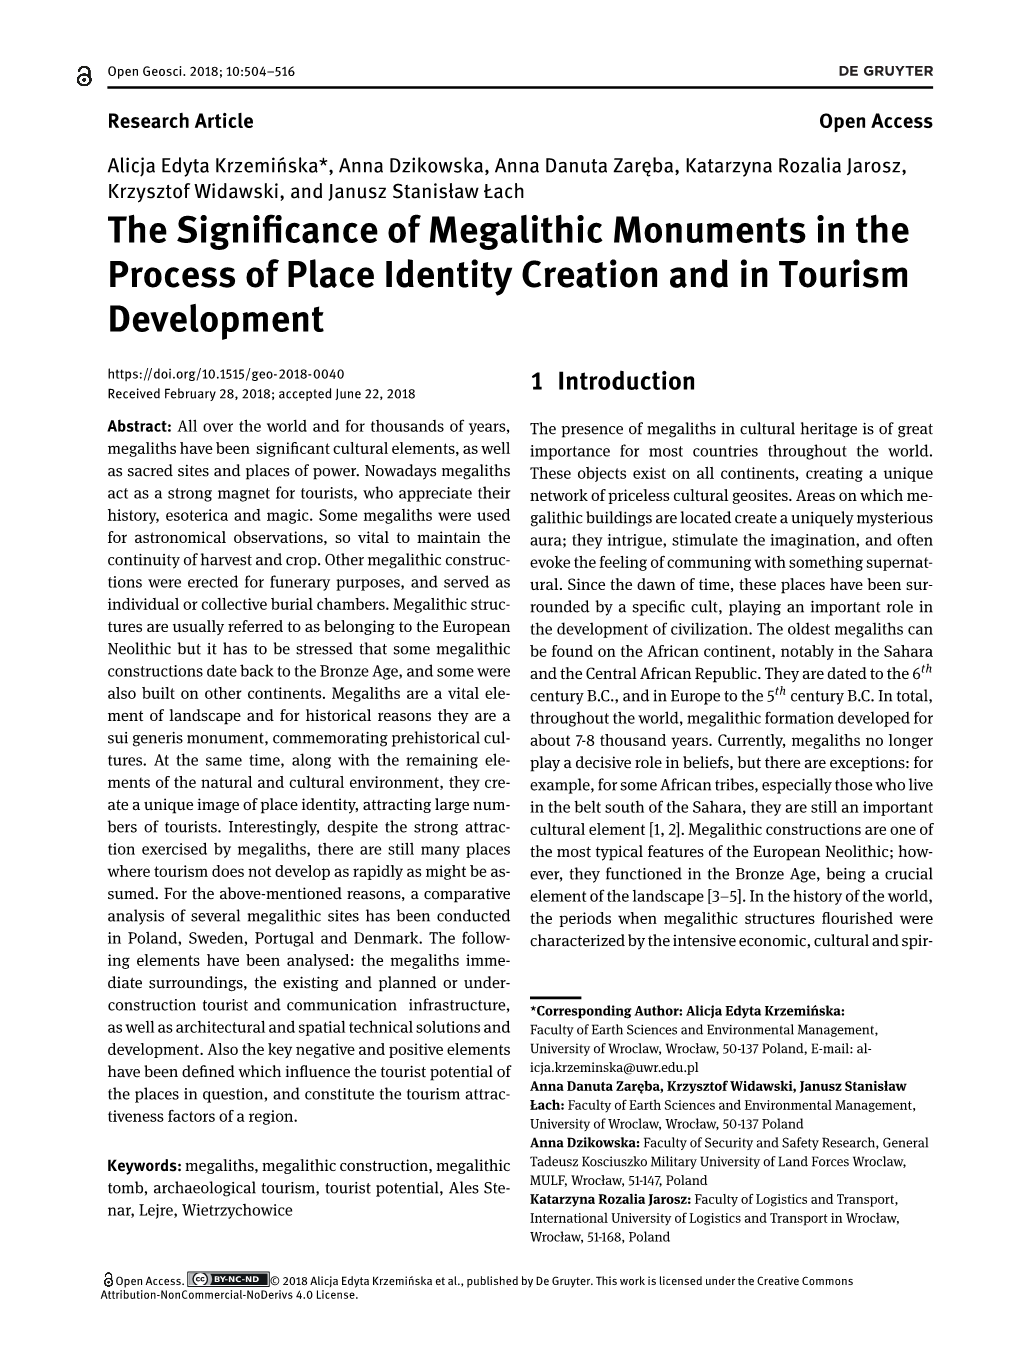 The Significance of Megalithic Monuments in the Process of Place